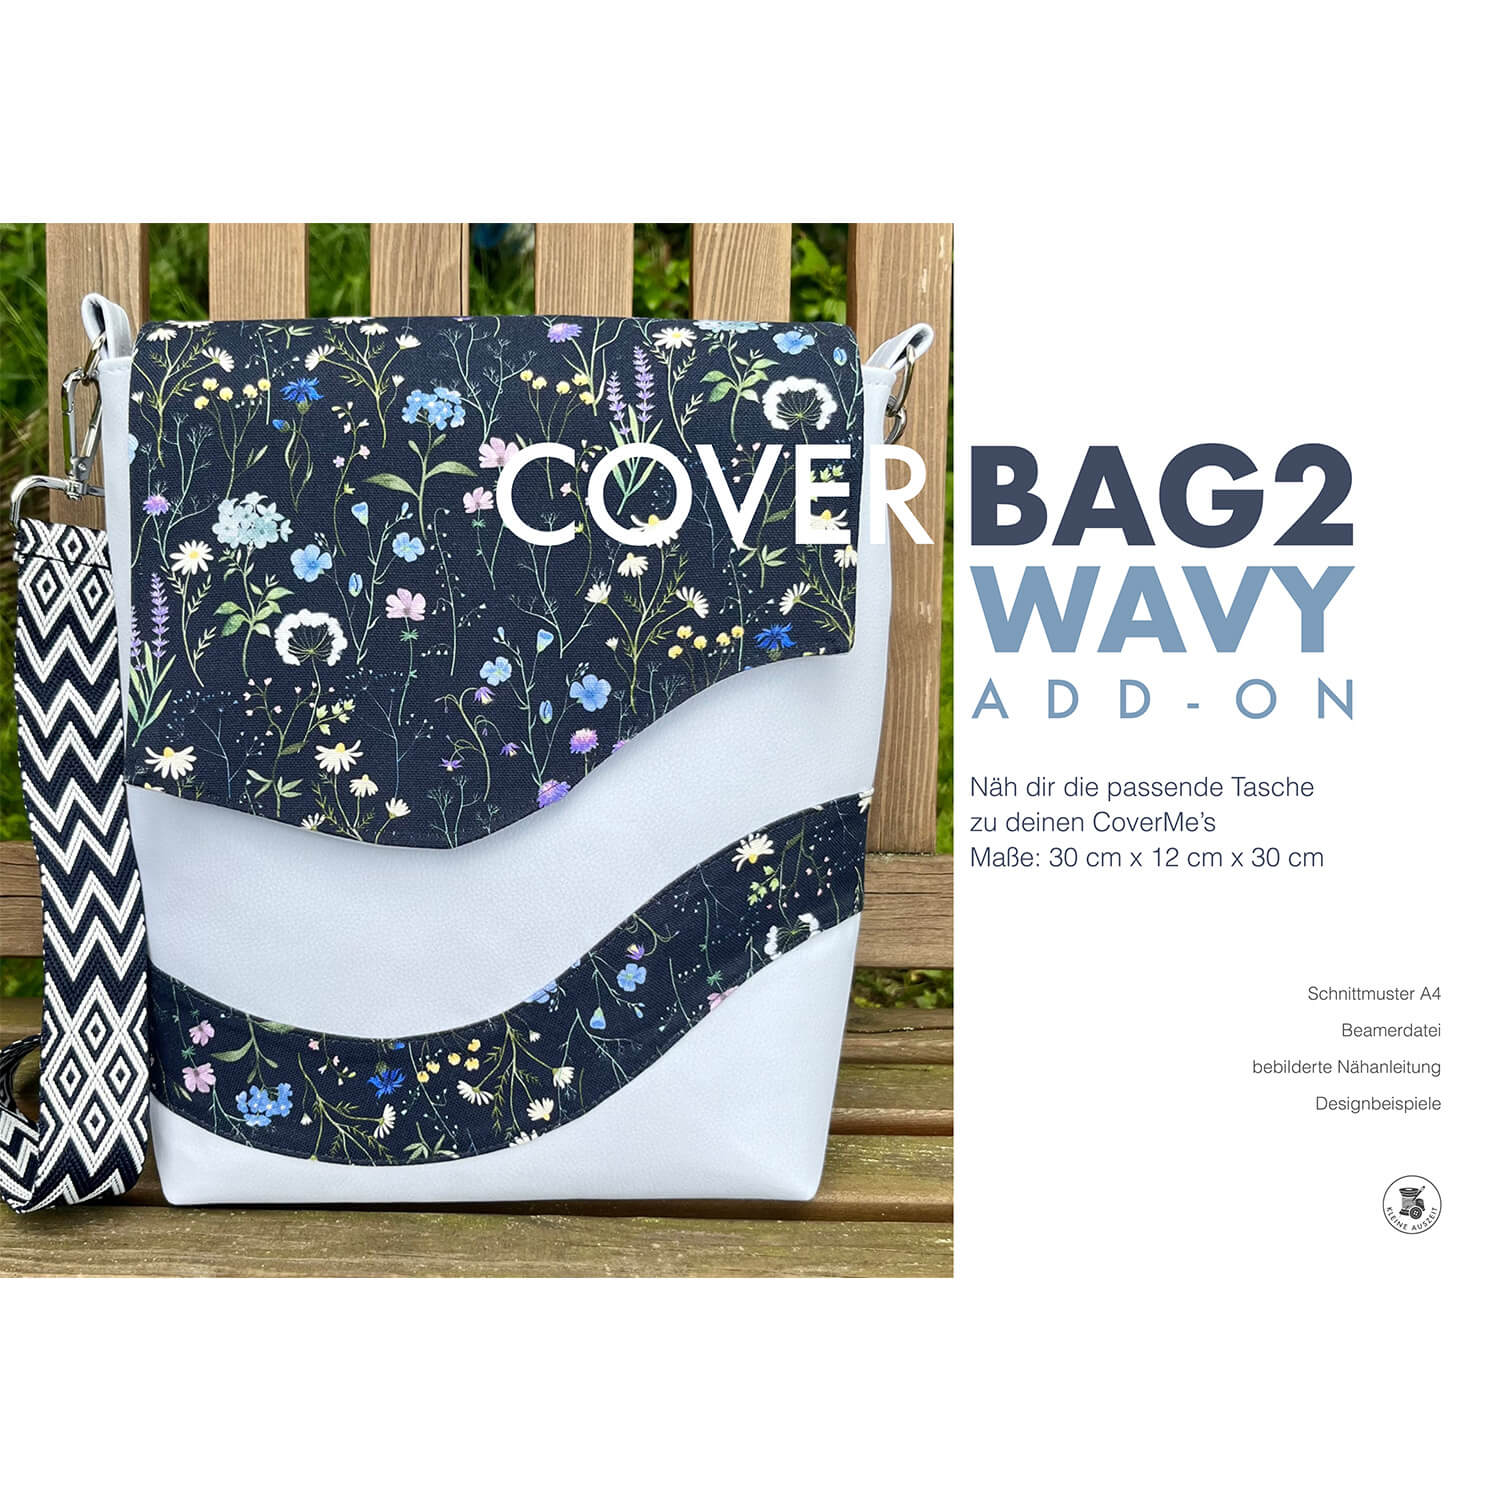 CoverBag2 Wavy Add-On